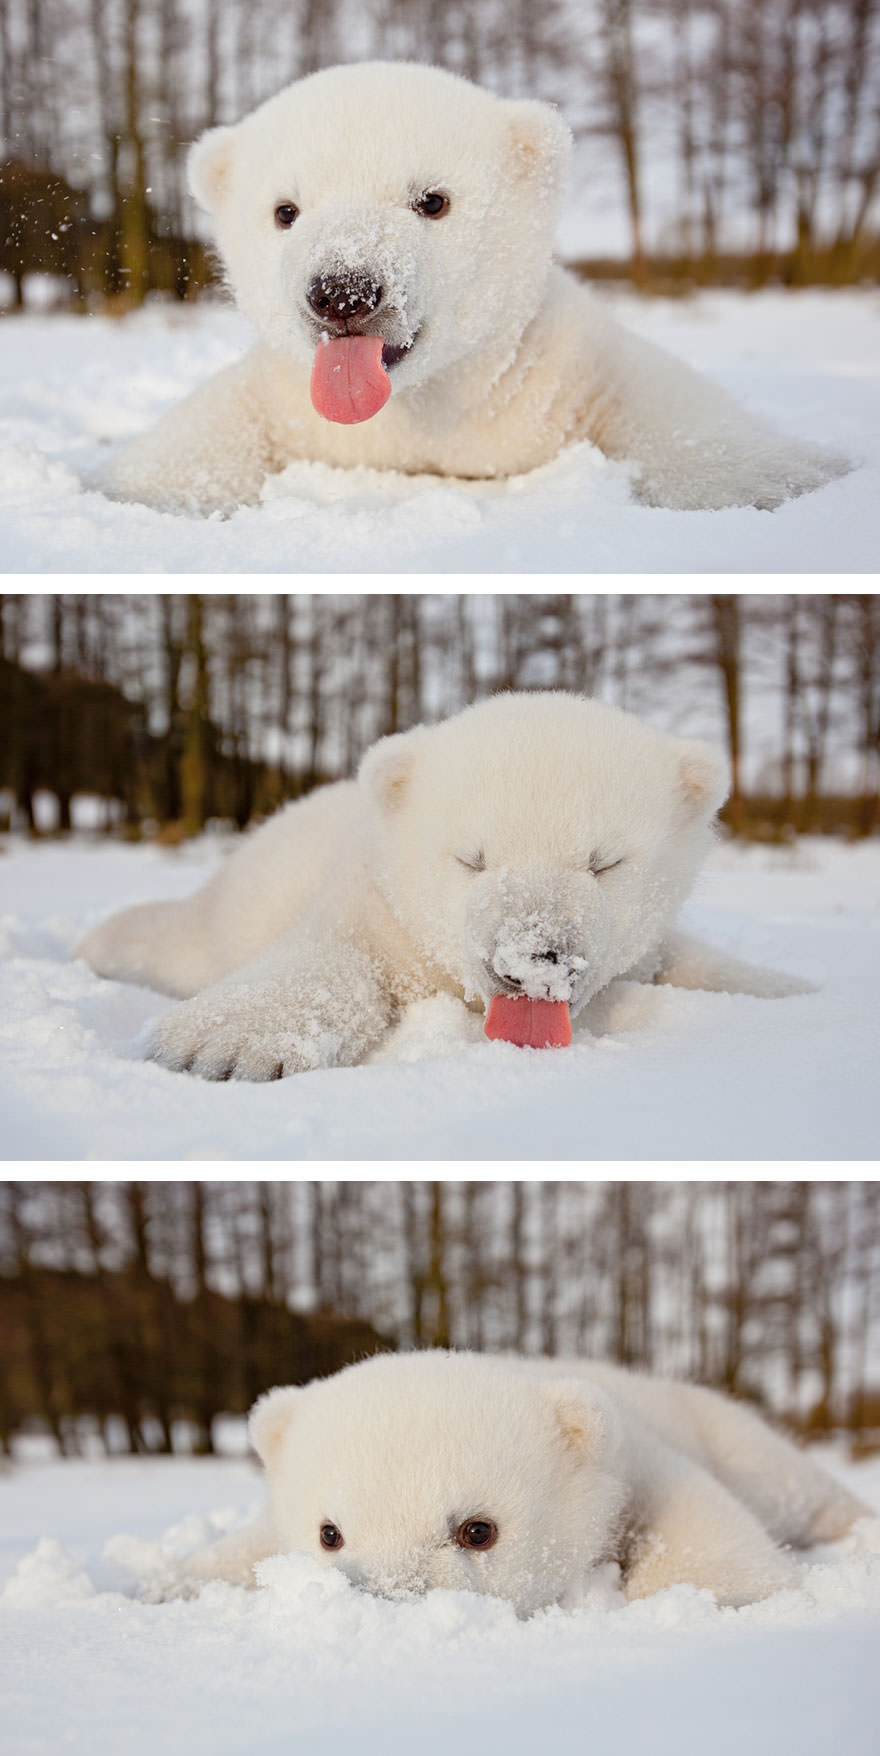 This baby polar bear saw snow for the first time